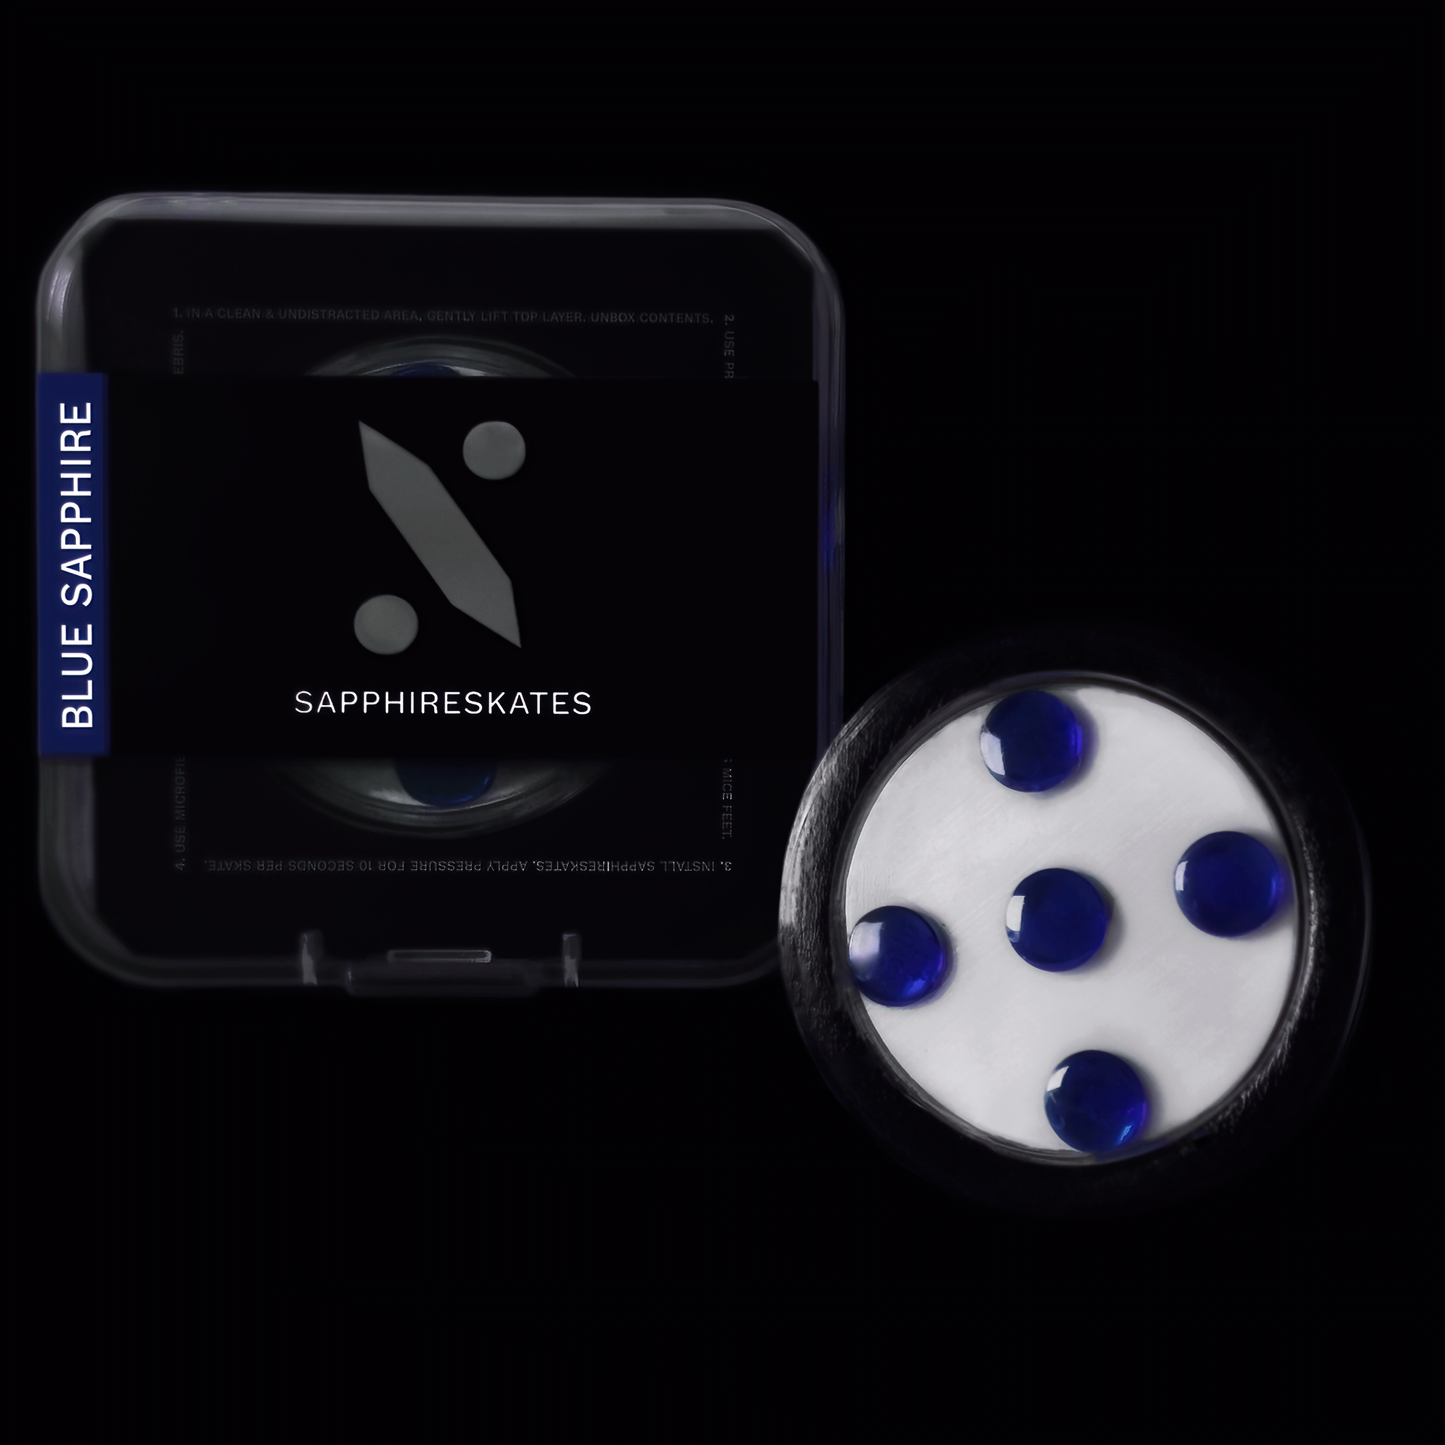 SAPPHIRESKATES Unscratchable Gaming Mouse Feet [BLUE SAPPHIRE LIMITED]